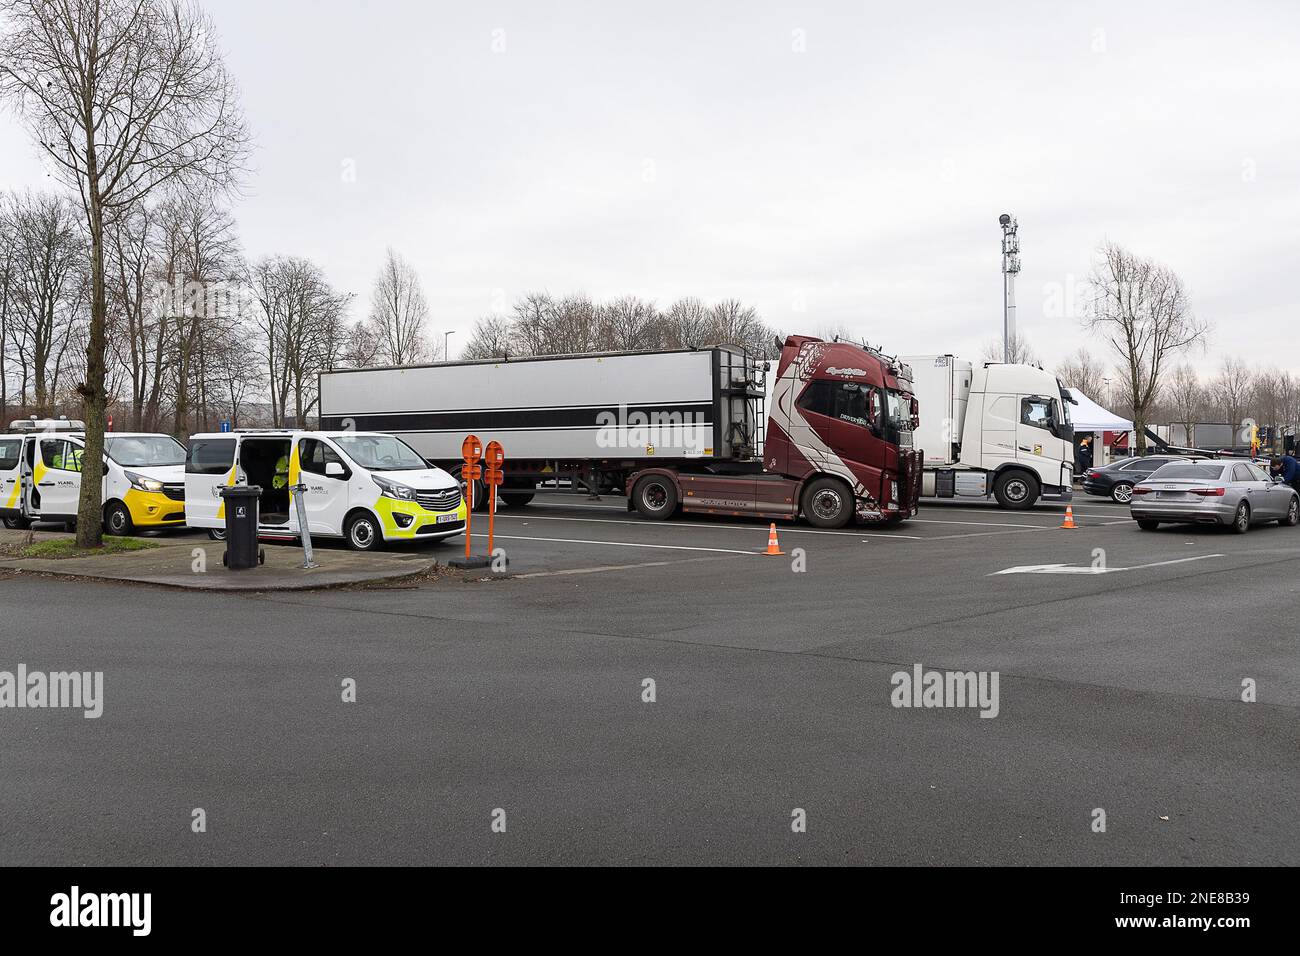 Illustration picture shows a major control action 'Albatross' by the police, customs and inspection services on the E40 highway in Wetteren, Thursday 16 February 2023. Federal and local police services, customs, various inspection services and a delegation of inspectors from the Netherlands and Denmark will today check trucks and buses at the motorway parking areas along the E40 in Wetteren. Coordinated by the East Flanders Road Police, under the watchful eye of the public prosecutor's office and labor auditor of East Flanders, they will check on various aspects of heavy transport: the tachogr Stock Photo